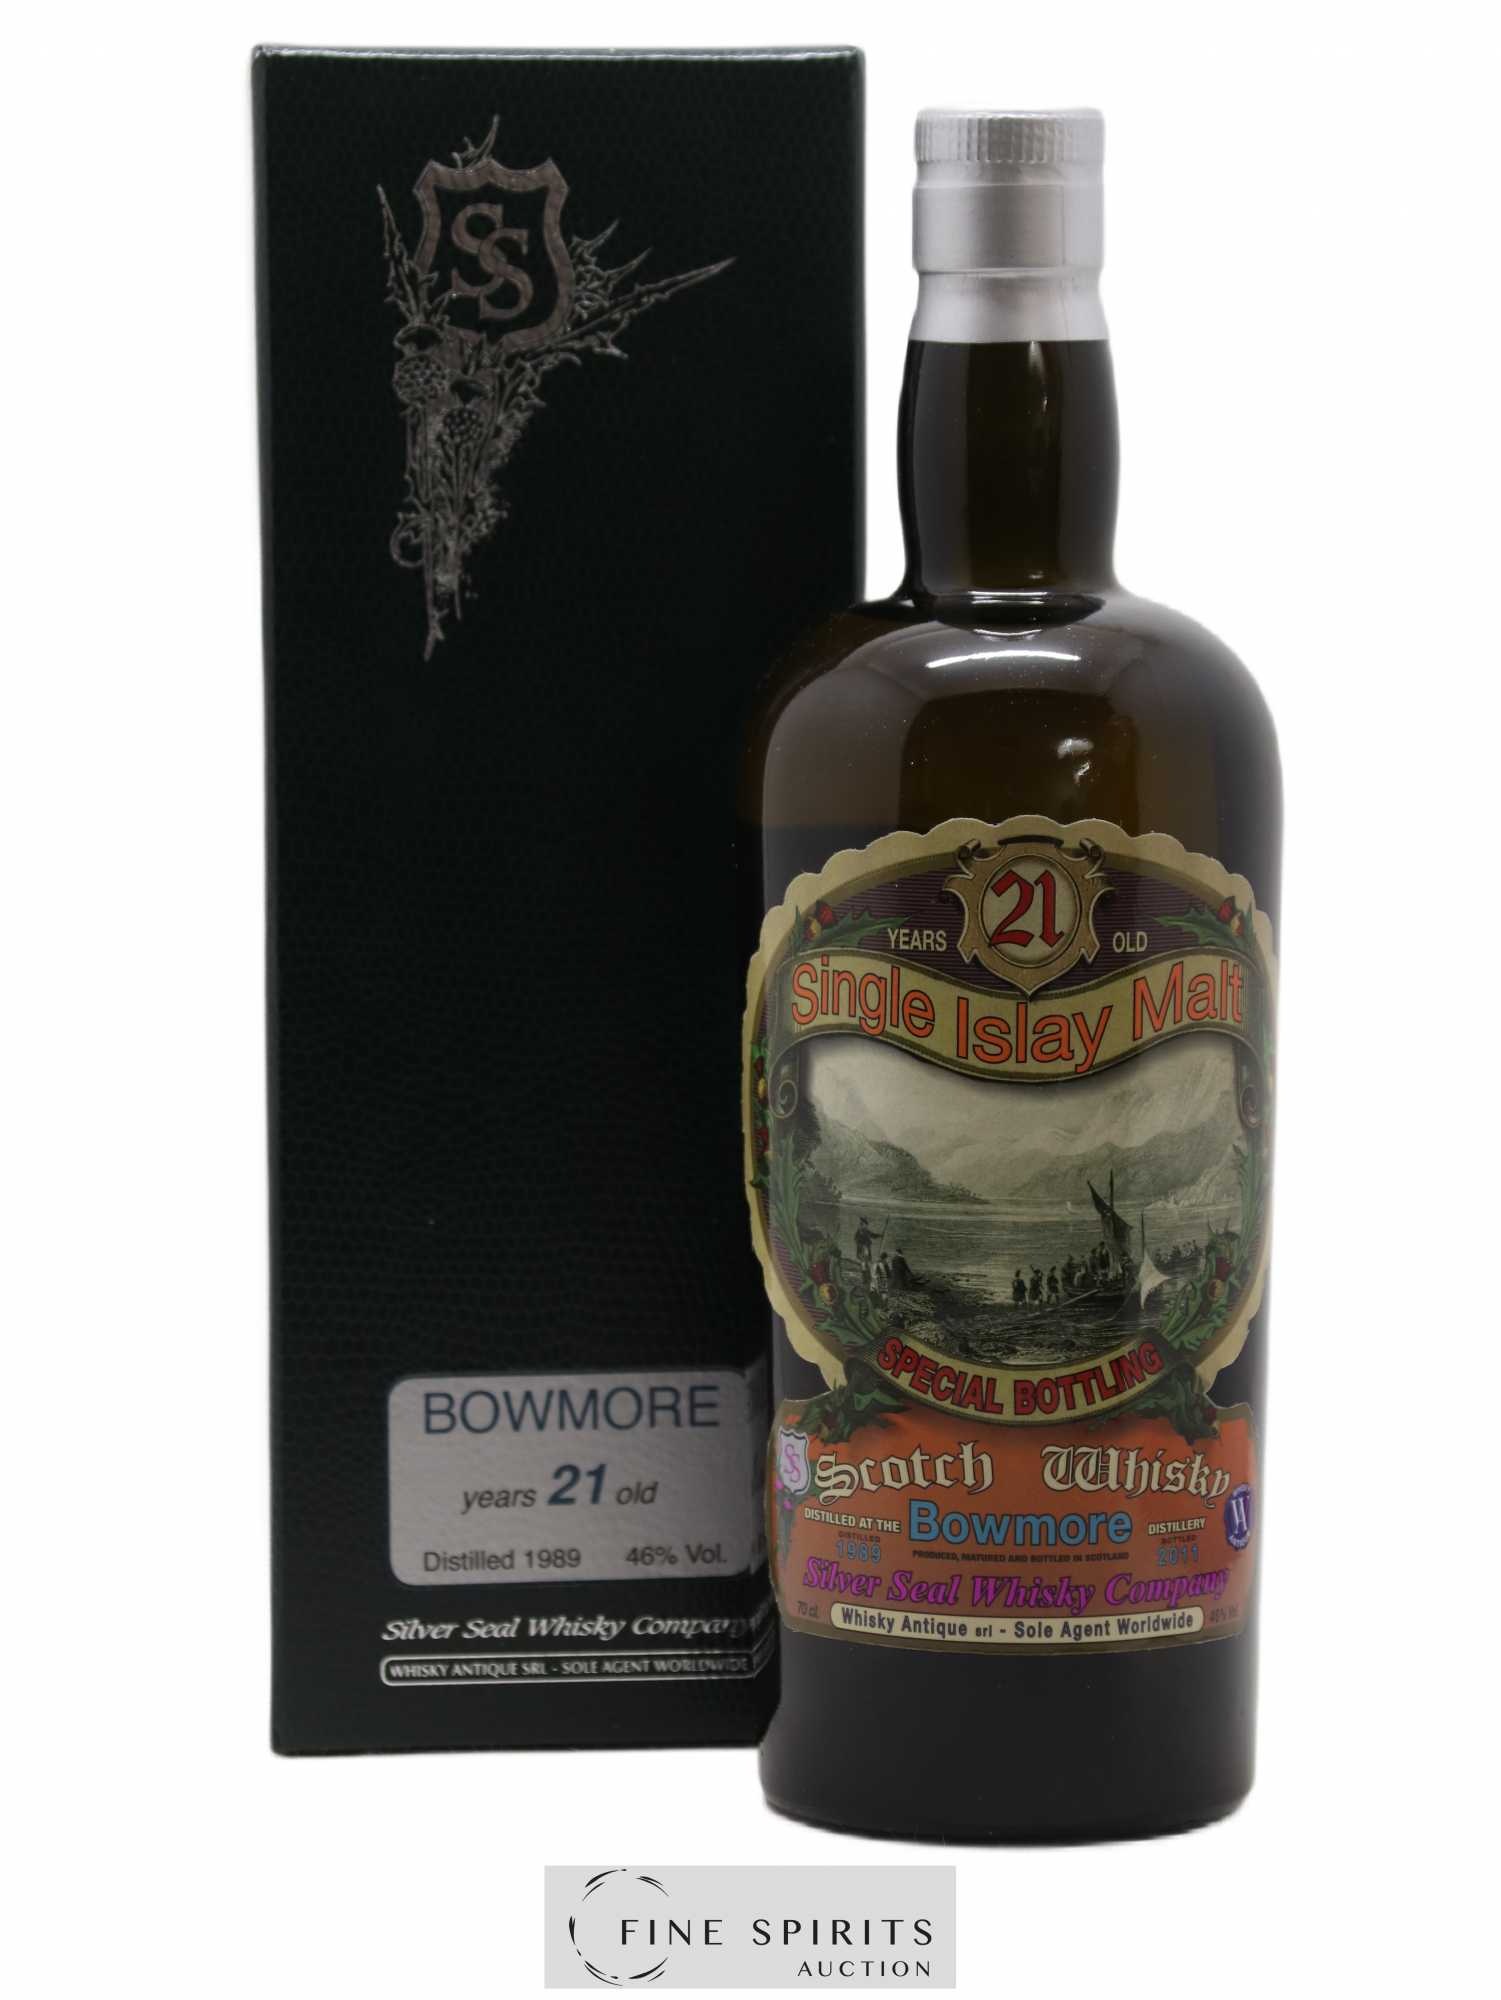 Bowmore 21 years 1989 Silver Seal Whisky Antique One of 565 - bottled 2011 Special Bottling 